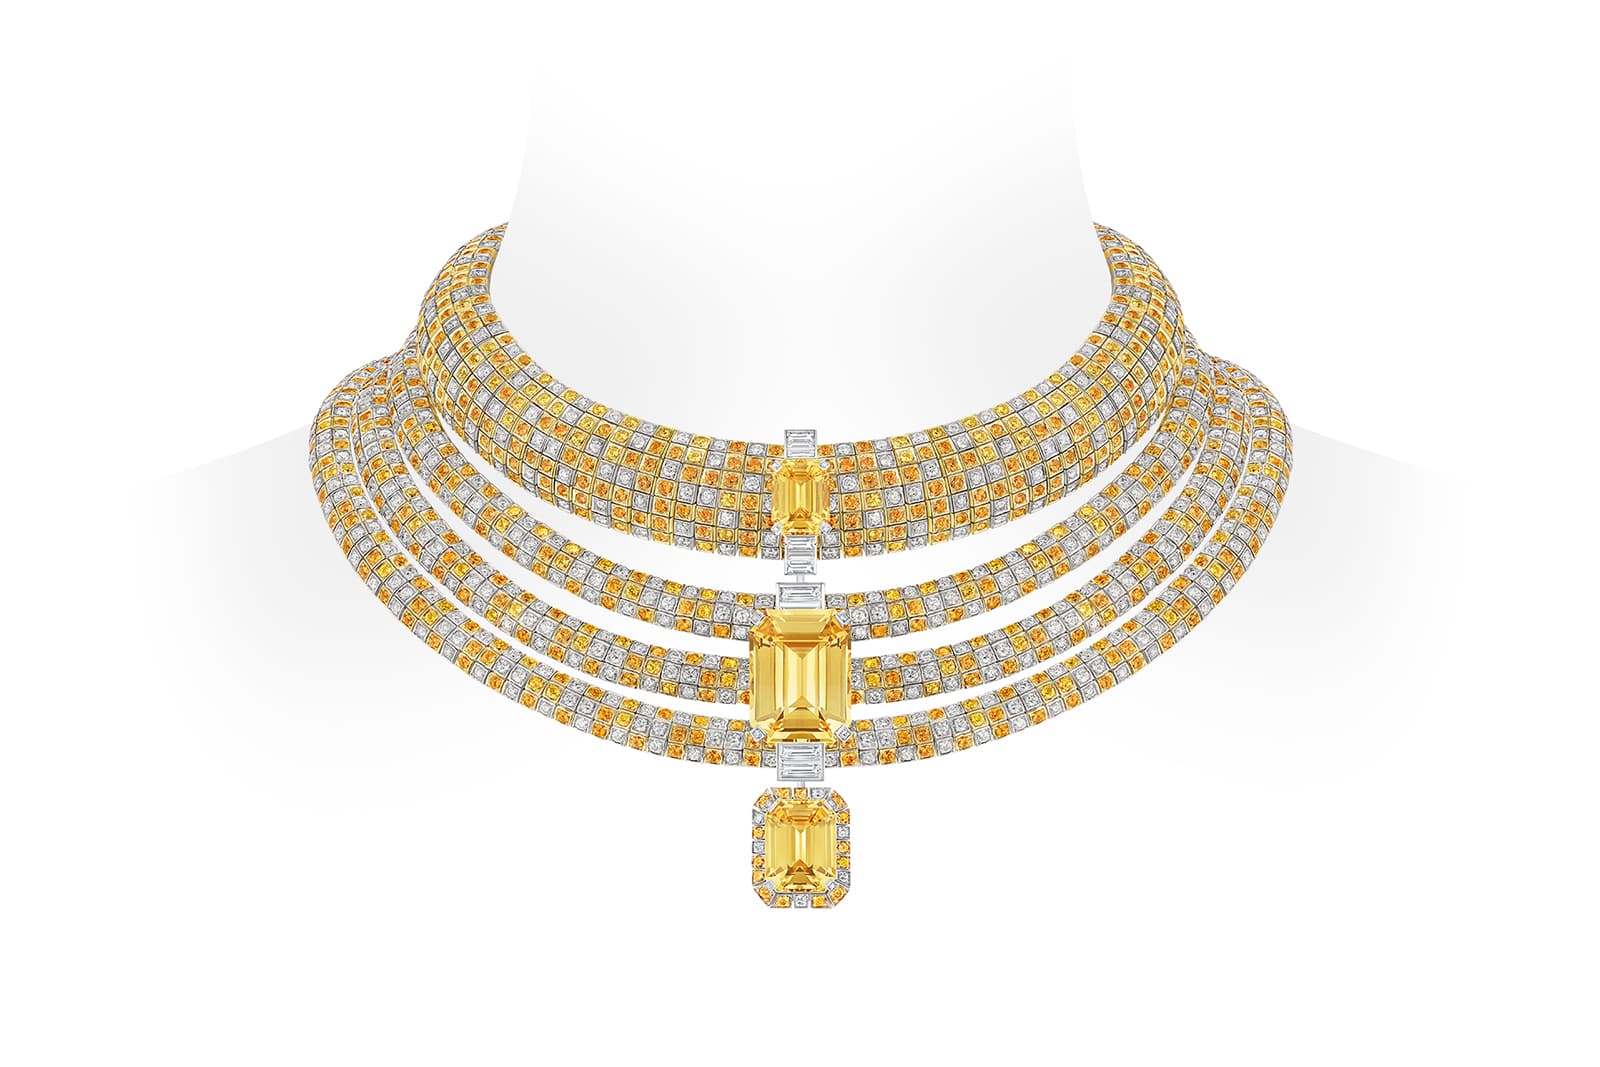 Louis Vuitton's high jewellery pays homage to powerful women